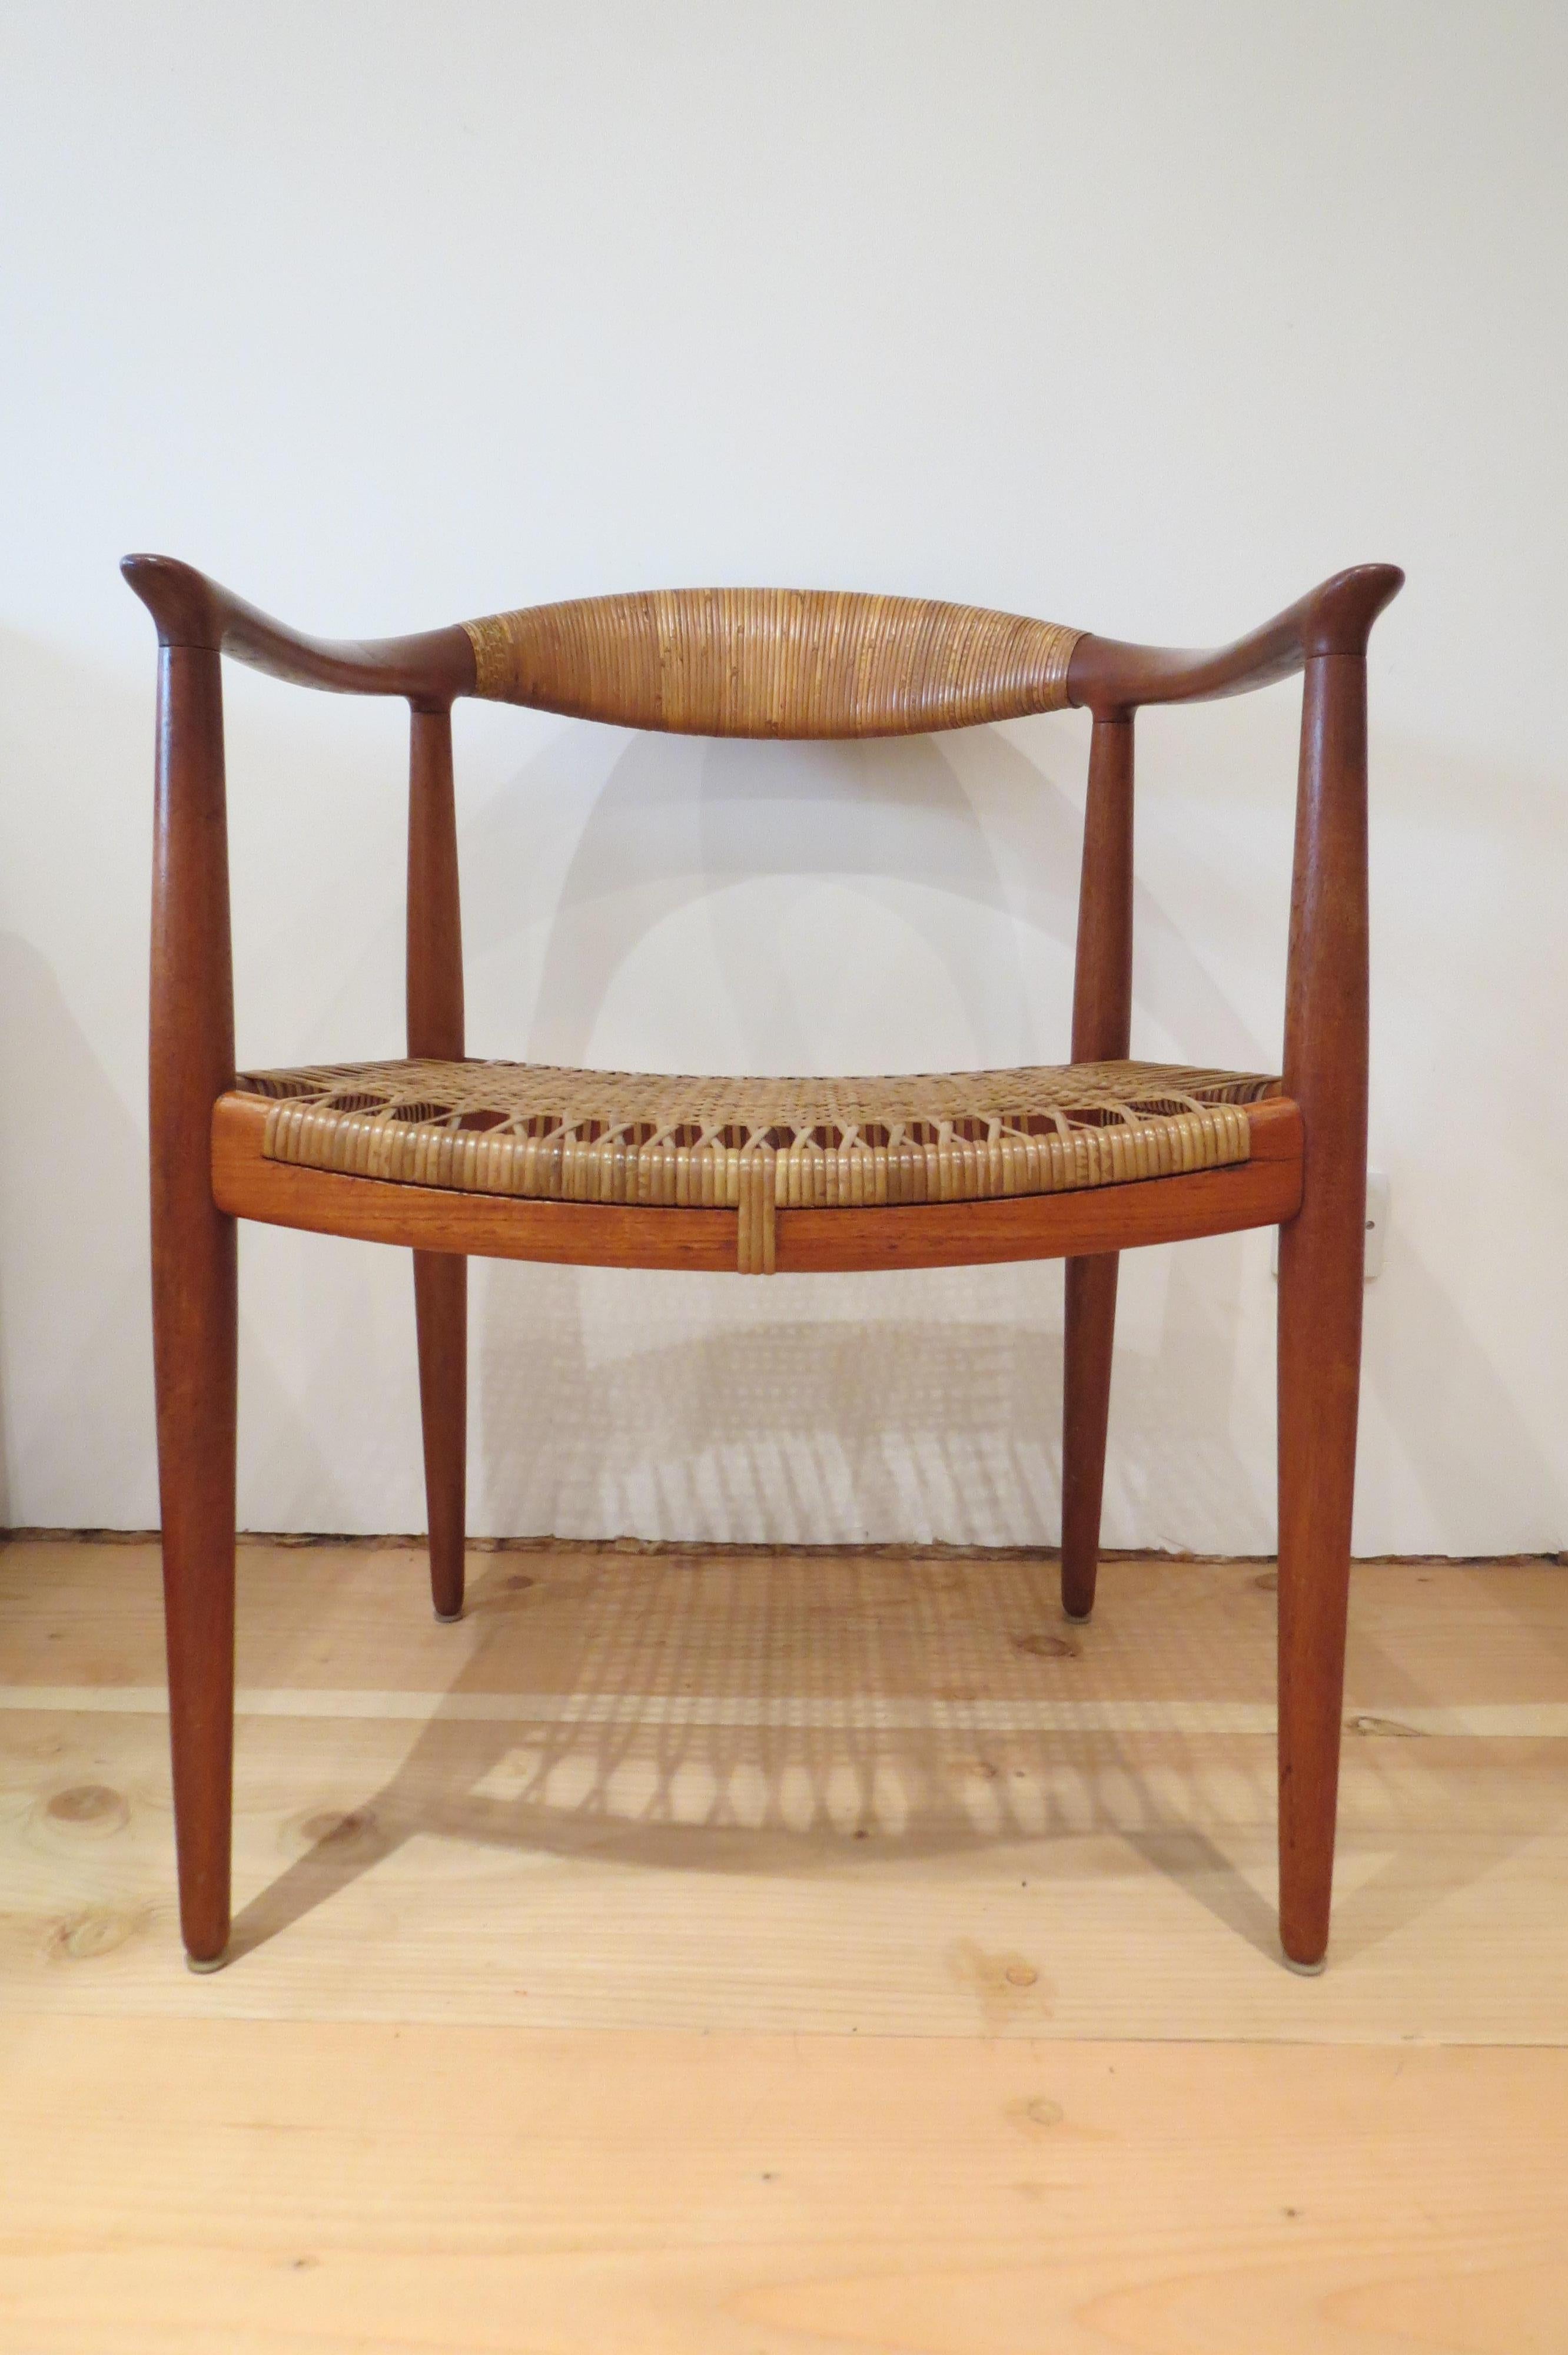 Early original JH 501 chair by Hans J Wegner for Johannes Hansen, 1950.

An original very early edition that dates between 1949 and 1951 of The Chair by Hans J Wegner. The chair was designed in 1949, so this is a very early edition of this model.